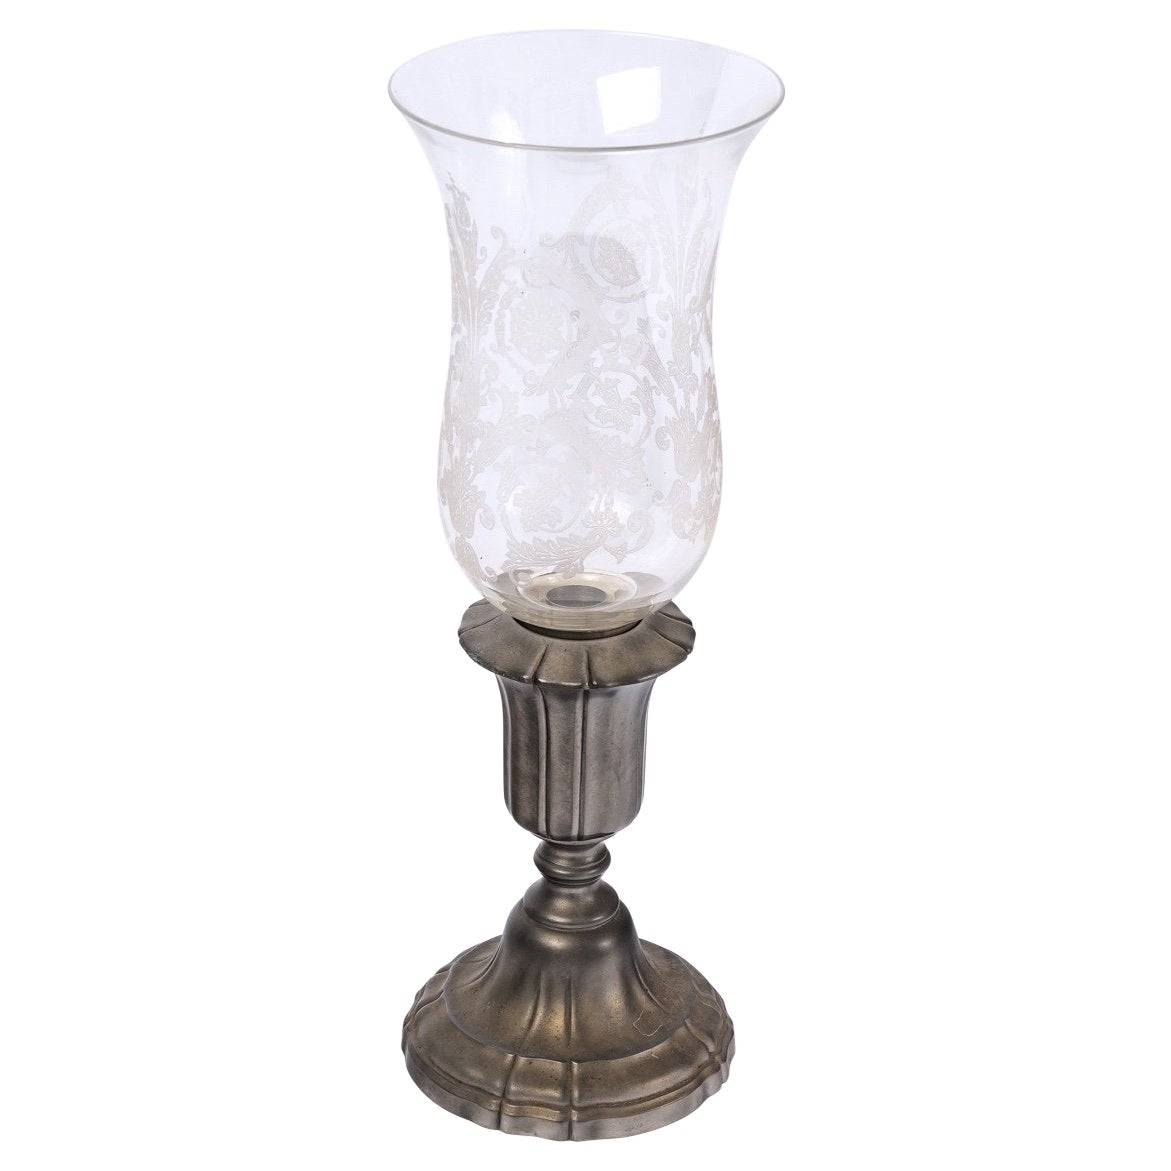 Tealight Candlestick Lamp - Baccarat Crystal And Pewter From The Manor - XX th